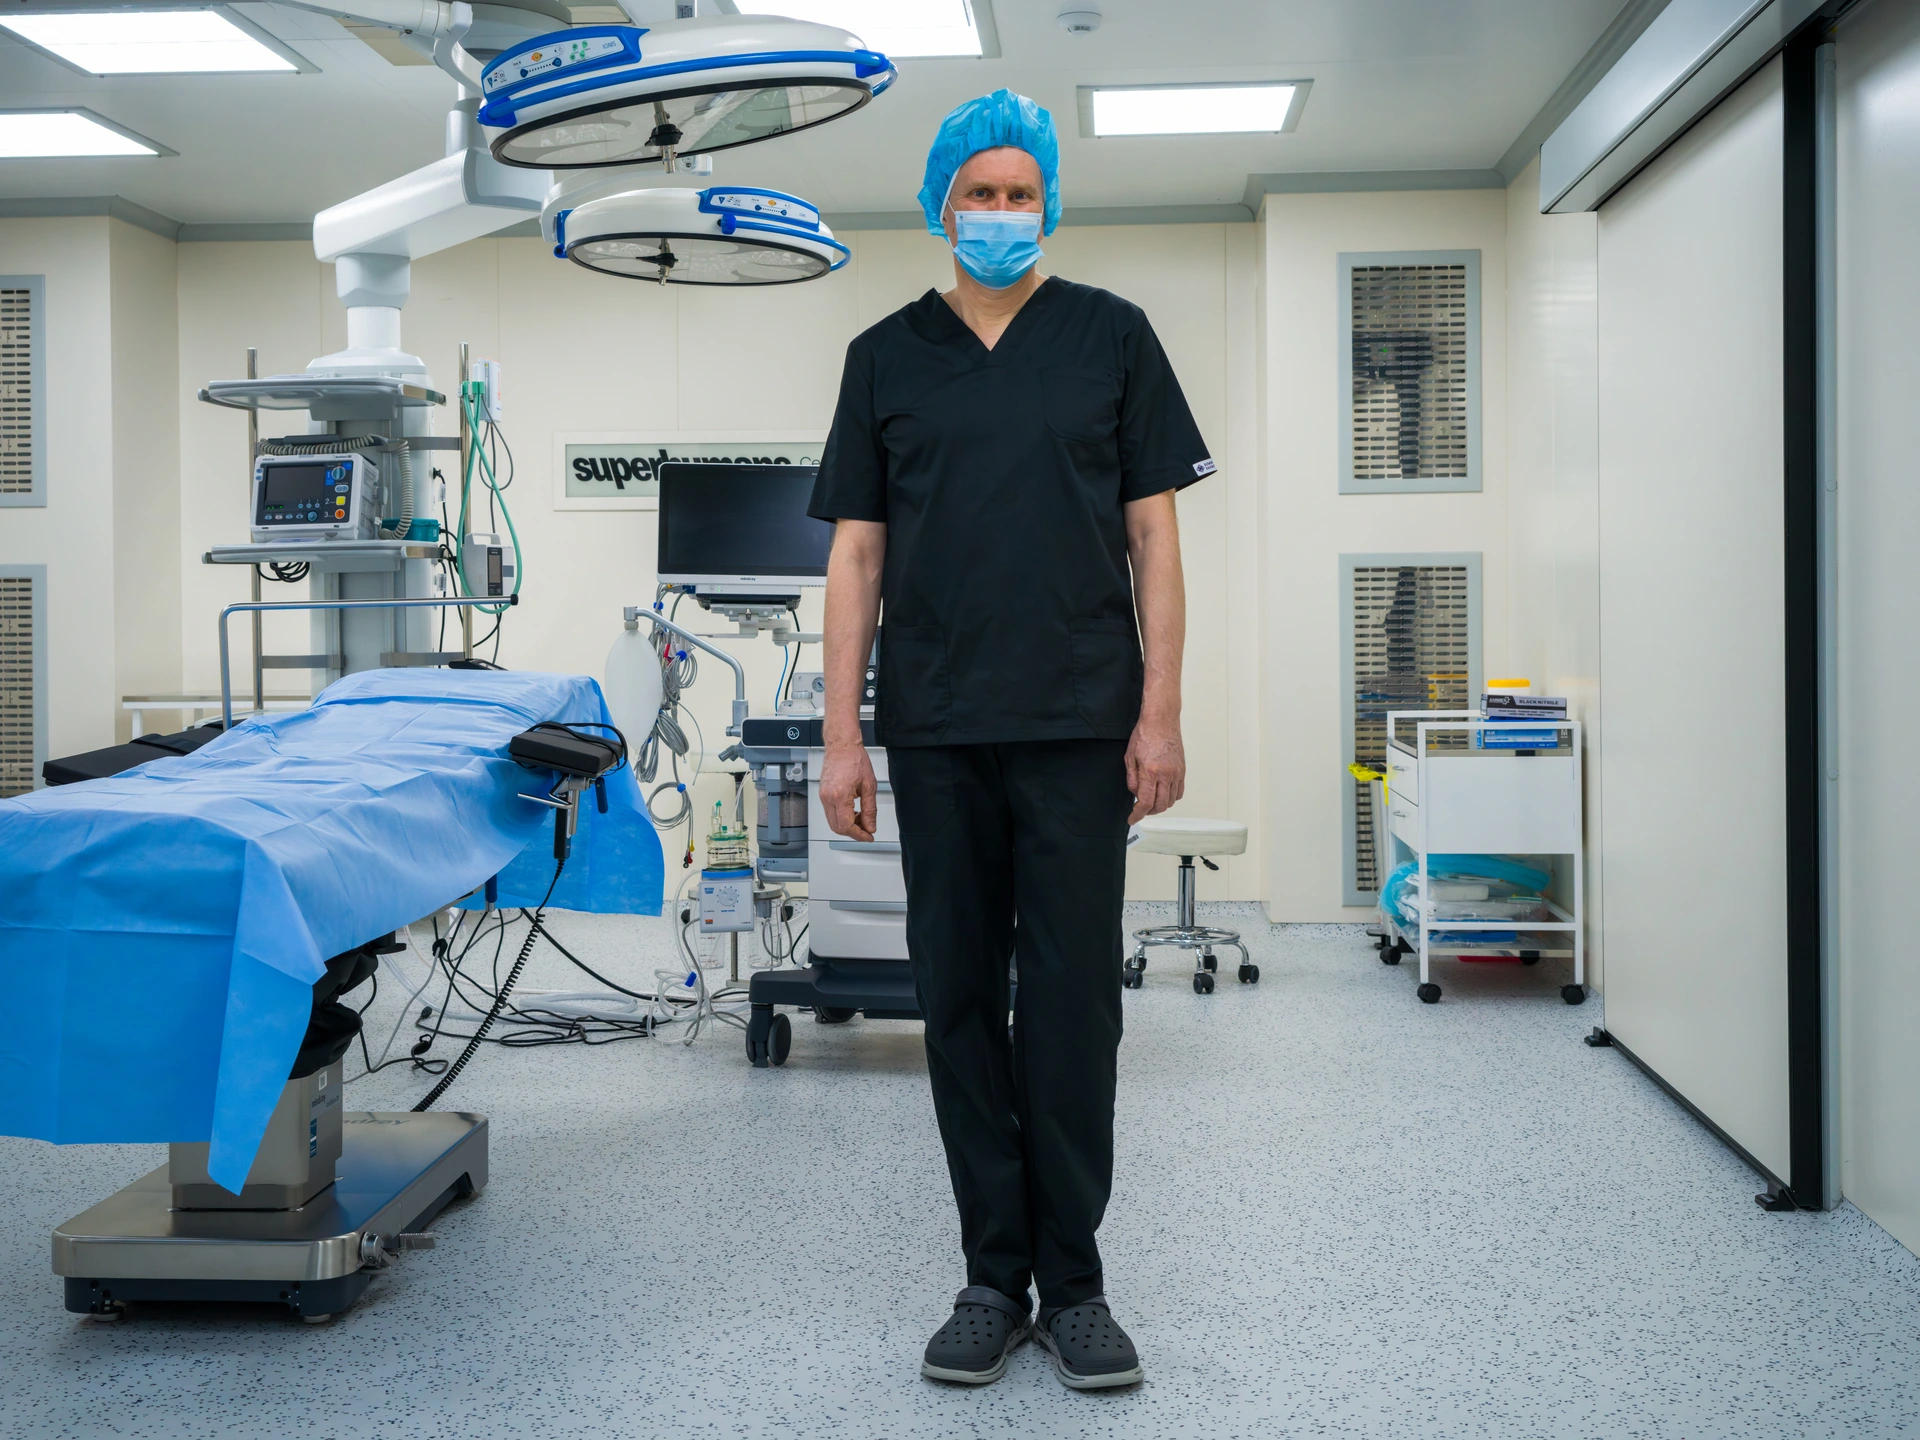 A man stands in a brightly lit operating theatre, looking straight at the camera, with an operating table to his right and surgical equipment and a light stand in the background. The man is wearing a light blue surgical cap and mask, a dark blue hospital uniform, and dark blue plastic slip-on shoes. The man is Andrii Vilensky, the Medical Director of the Superhumans Centre, a clinic in the western Ukrainian city of Lviv that provides expert prosthesis and rehabilitation treatment to Ukrainians injured in Russia's full-scale war on the country.